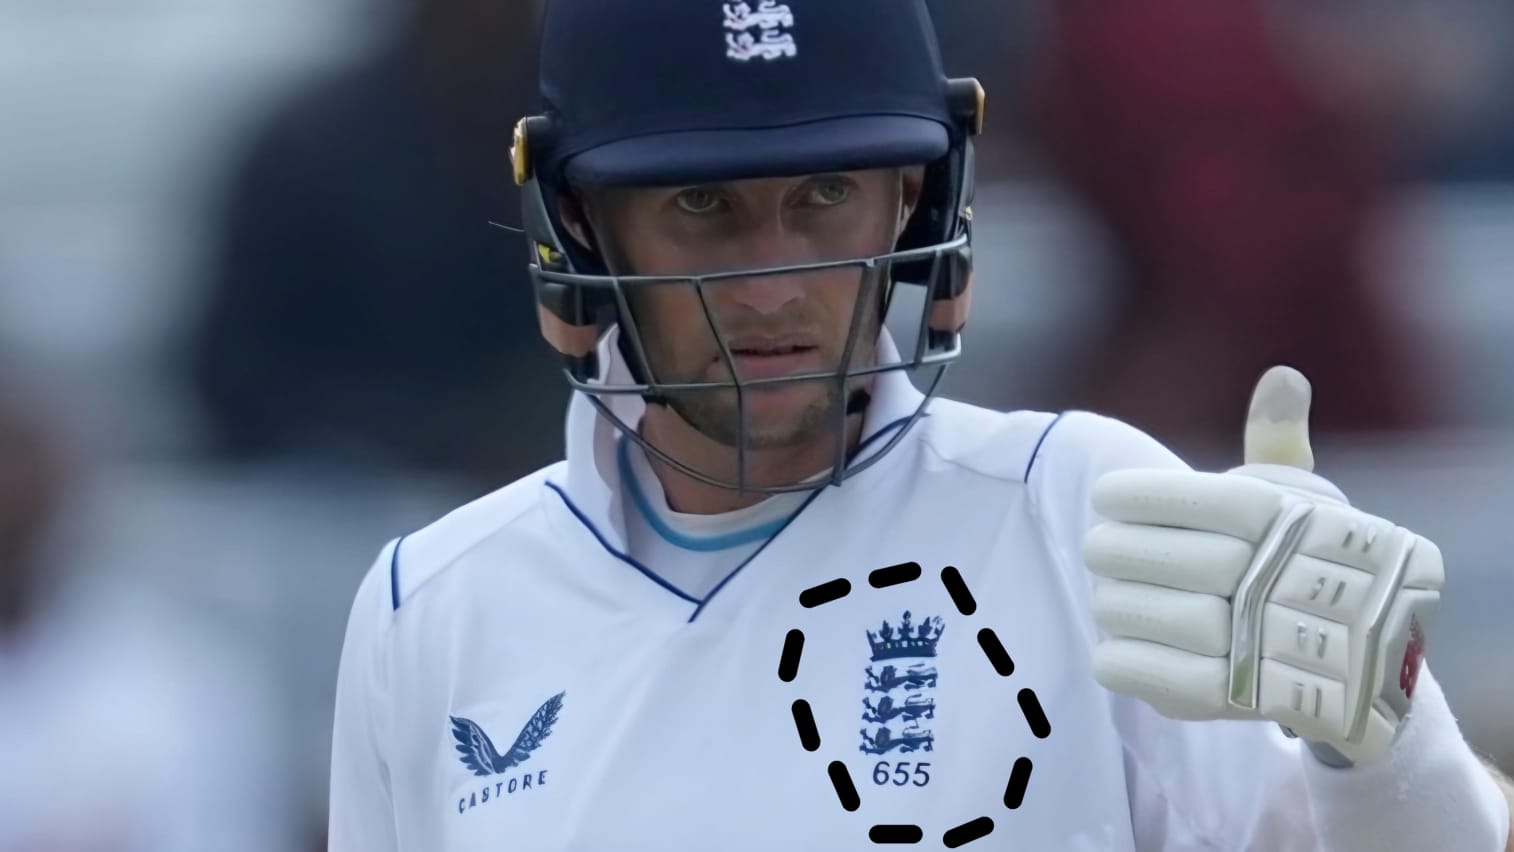 what are the numbers on the england cricket shirts